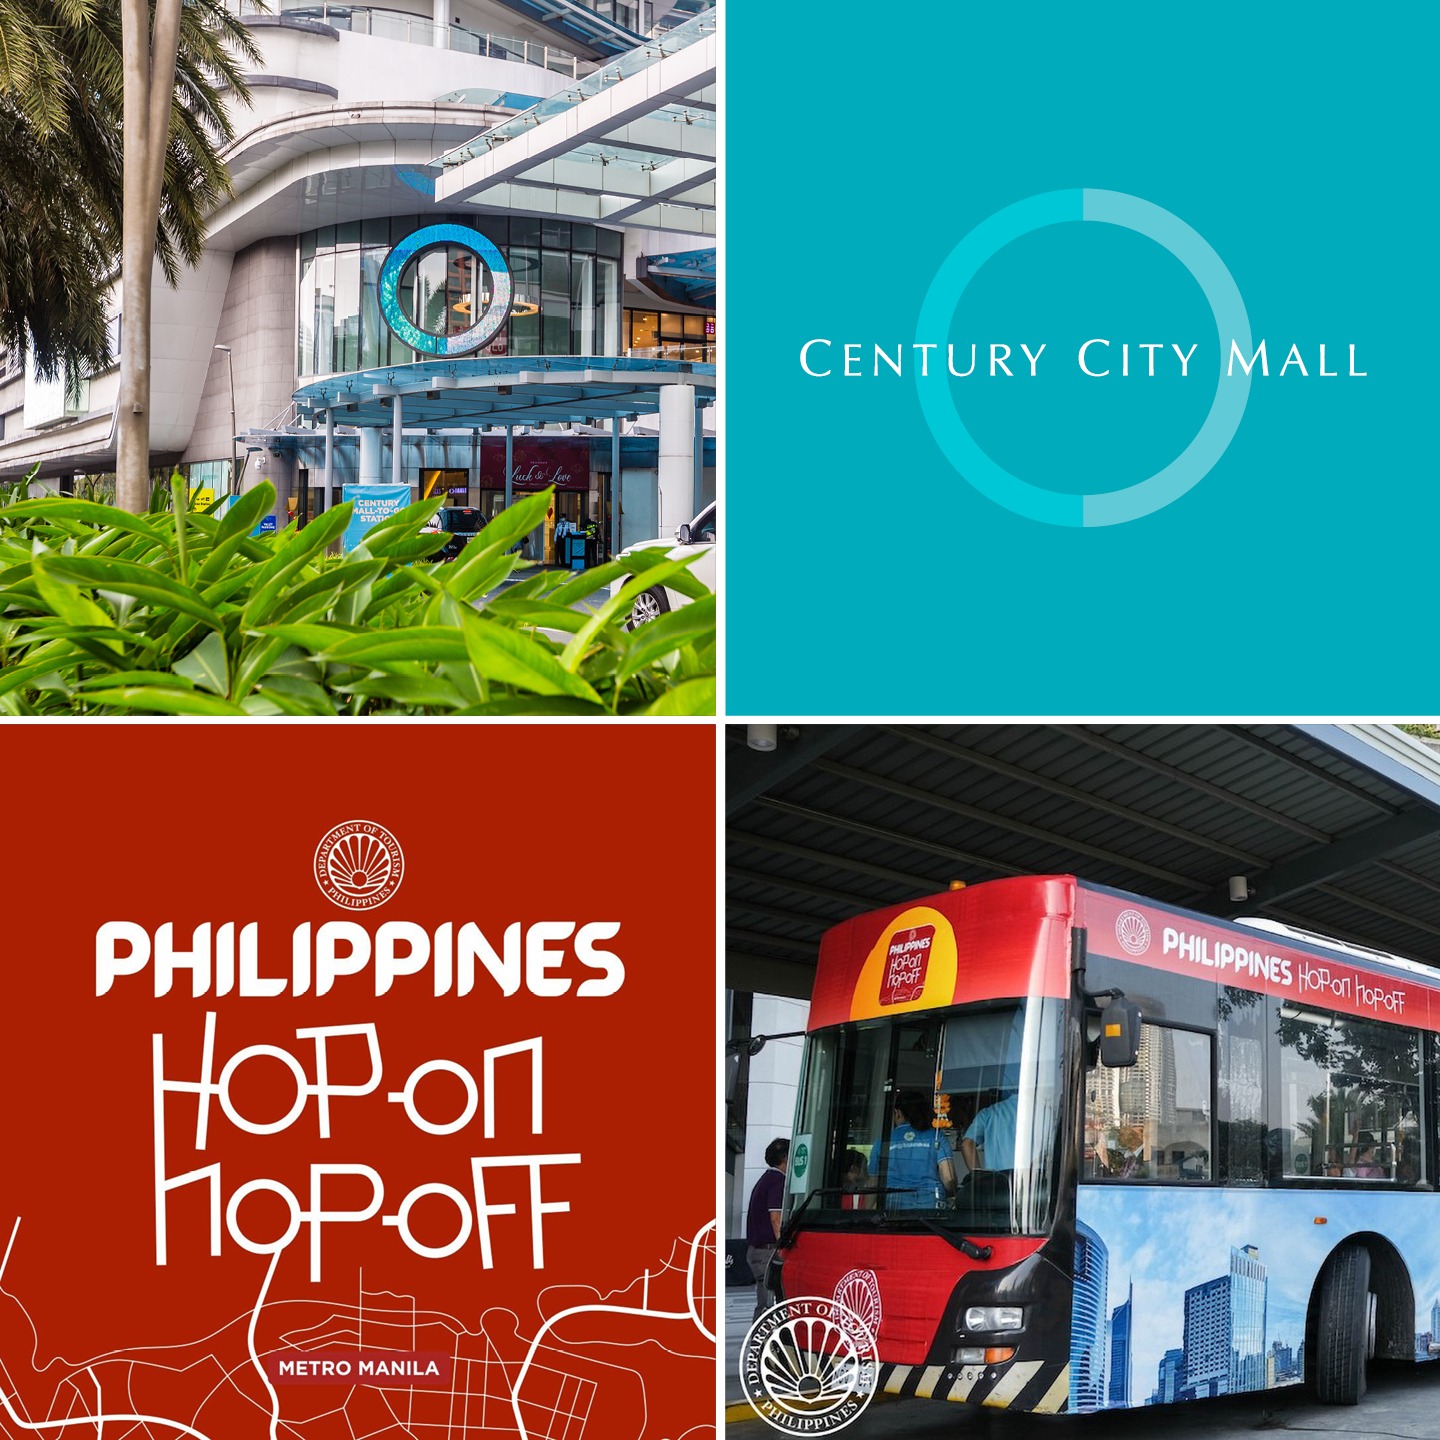 The HoHo Bus shall drop off and pick up passengers at the North Entrance of Century City Mall to give them the chance to visit the nearby dining and shopping spots in Poblacion.